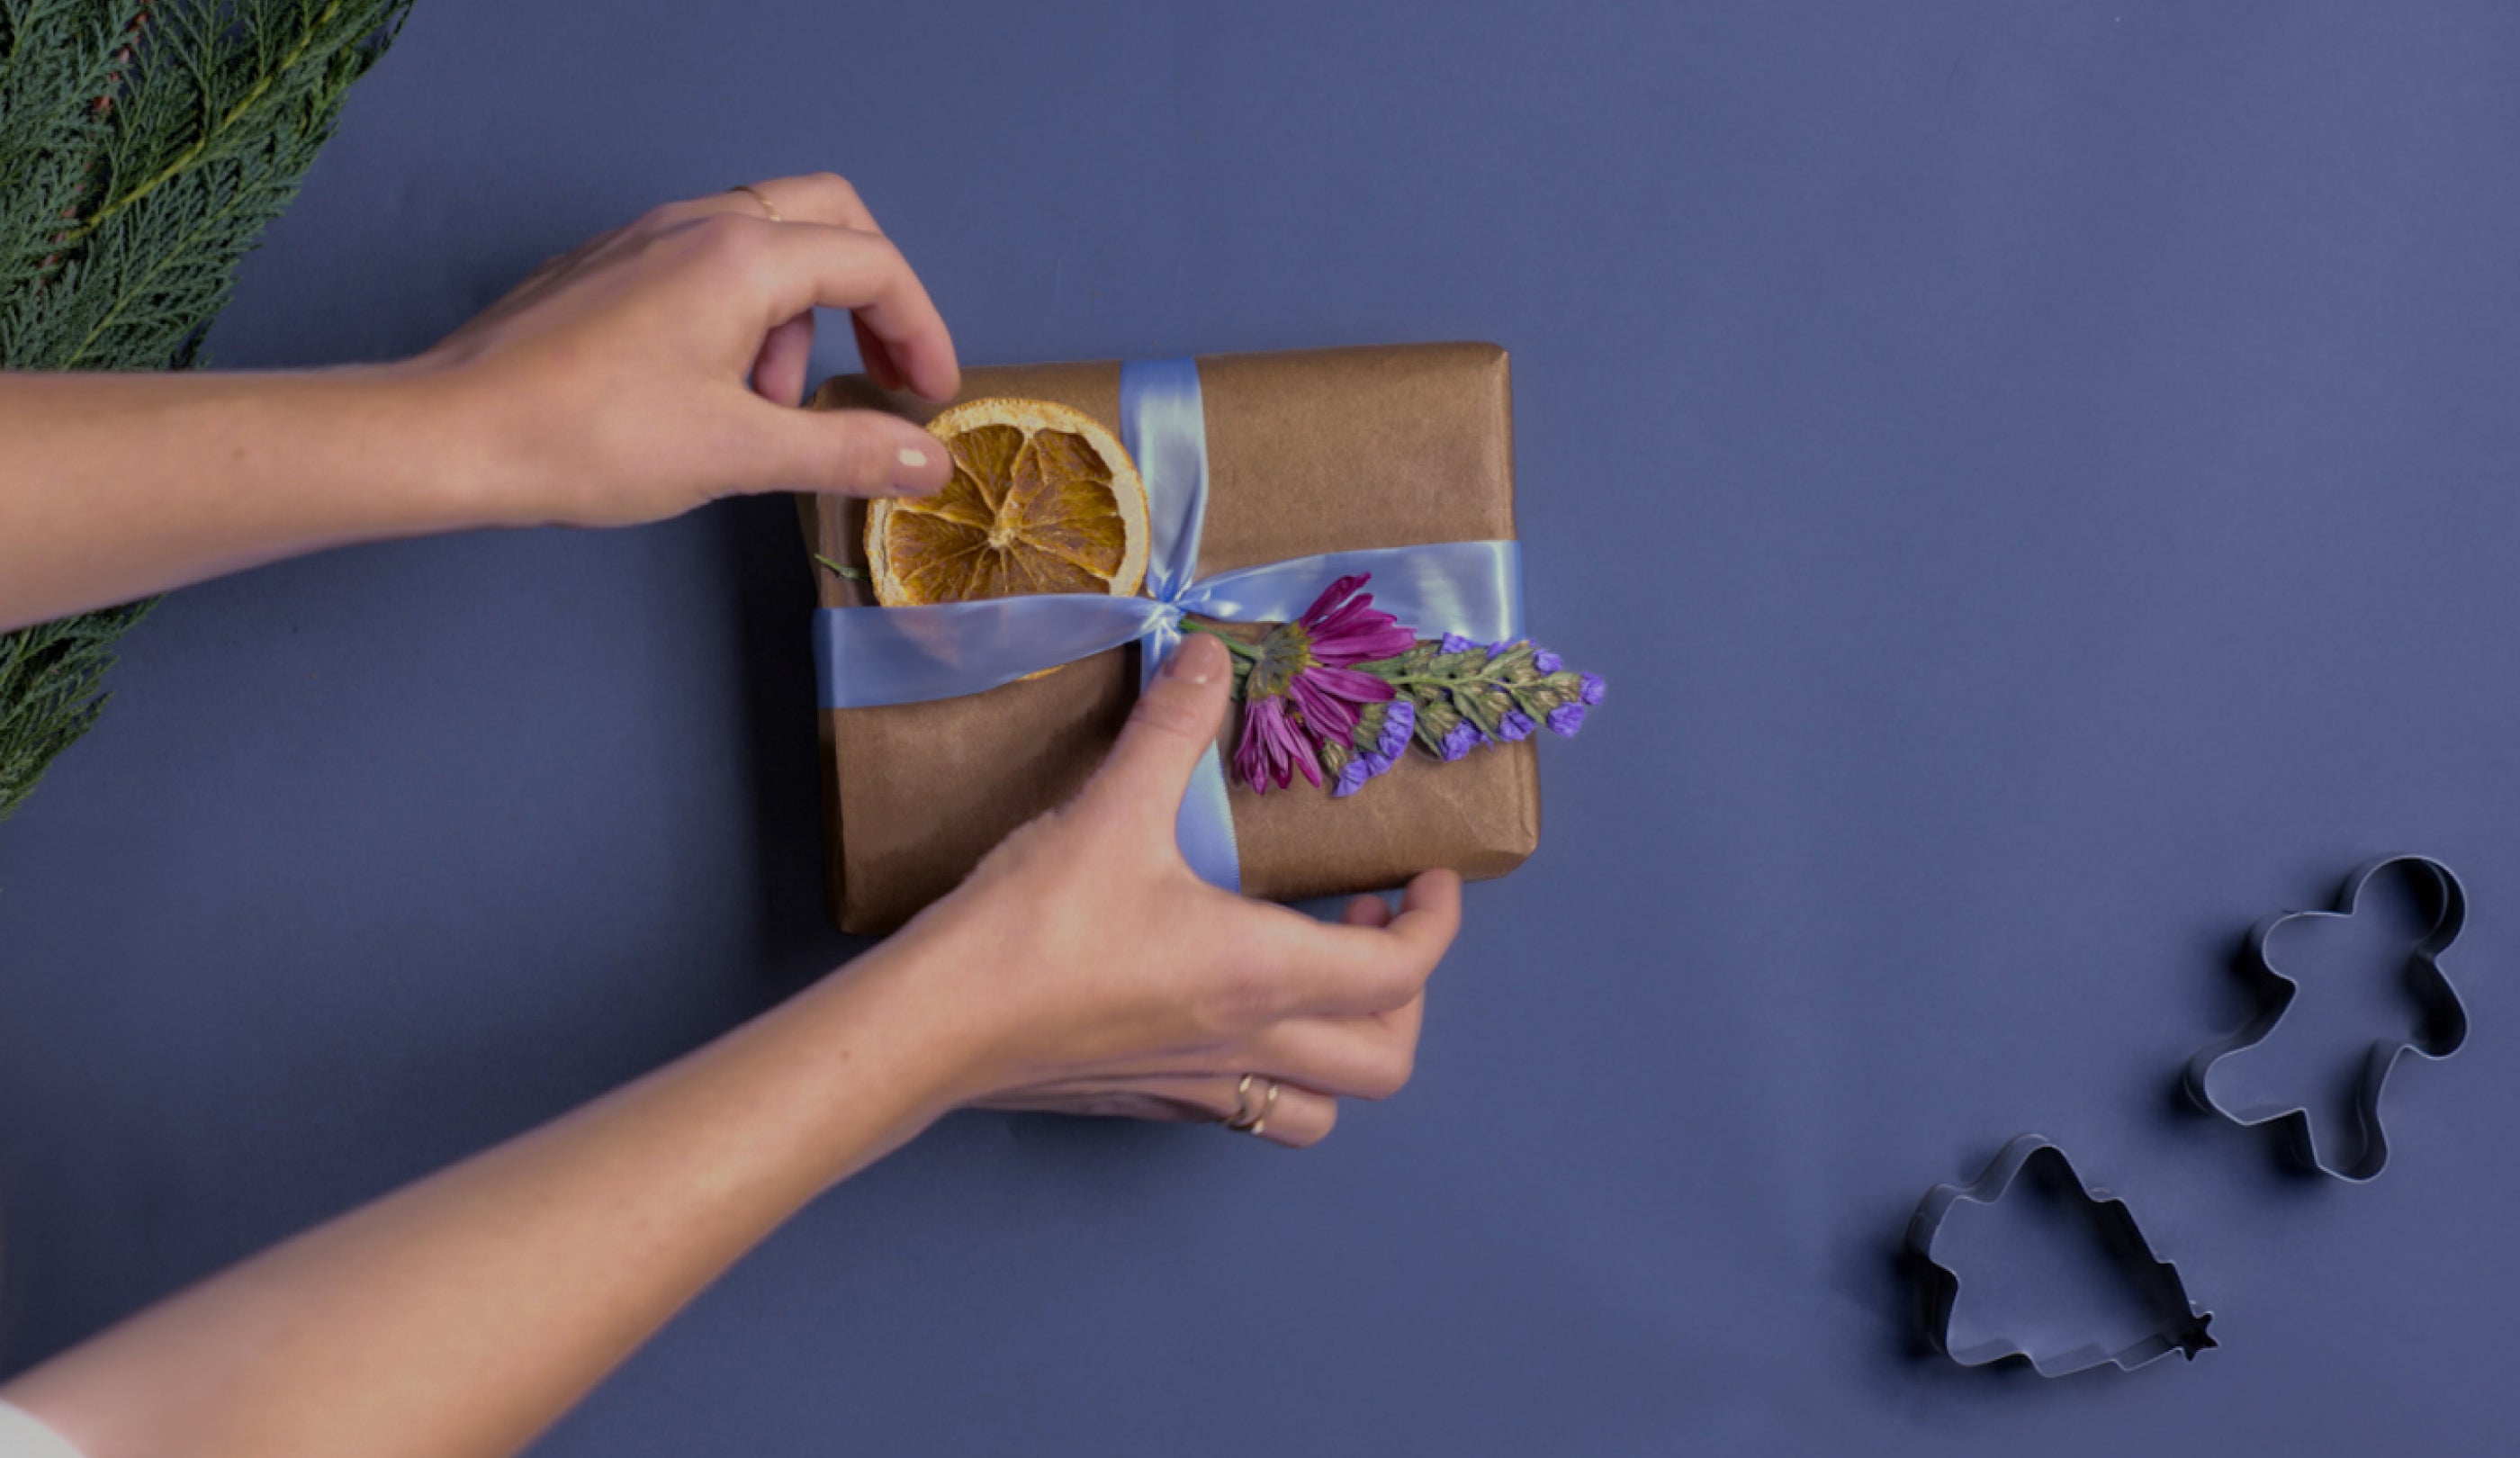 A woman’s forearms on a smooth surface with her hands are wrapping a gift with Kraft paper. She is using ribbon, a sprig of flowers, and a slice of dried orange to decorate package.